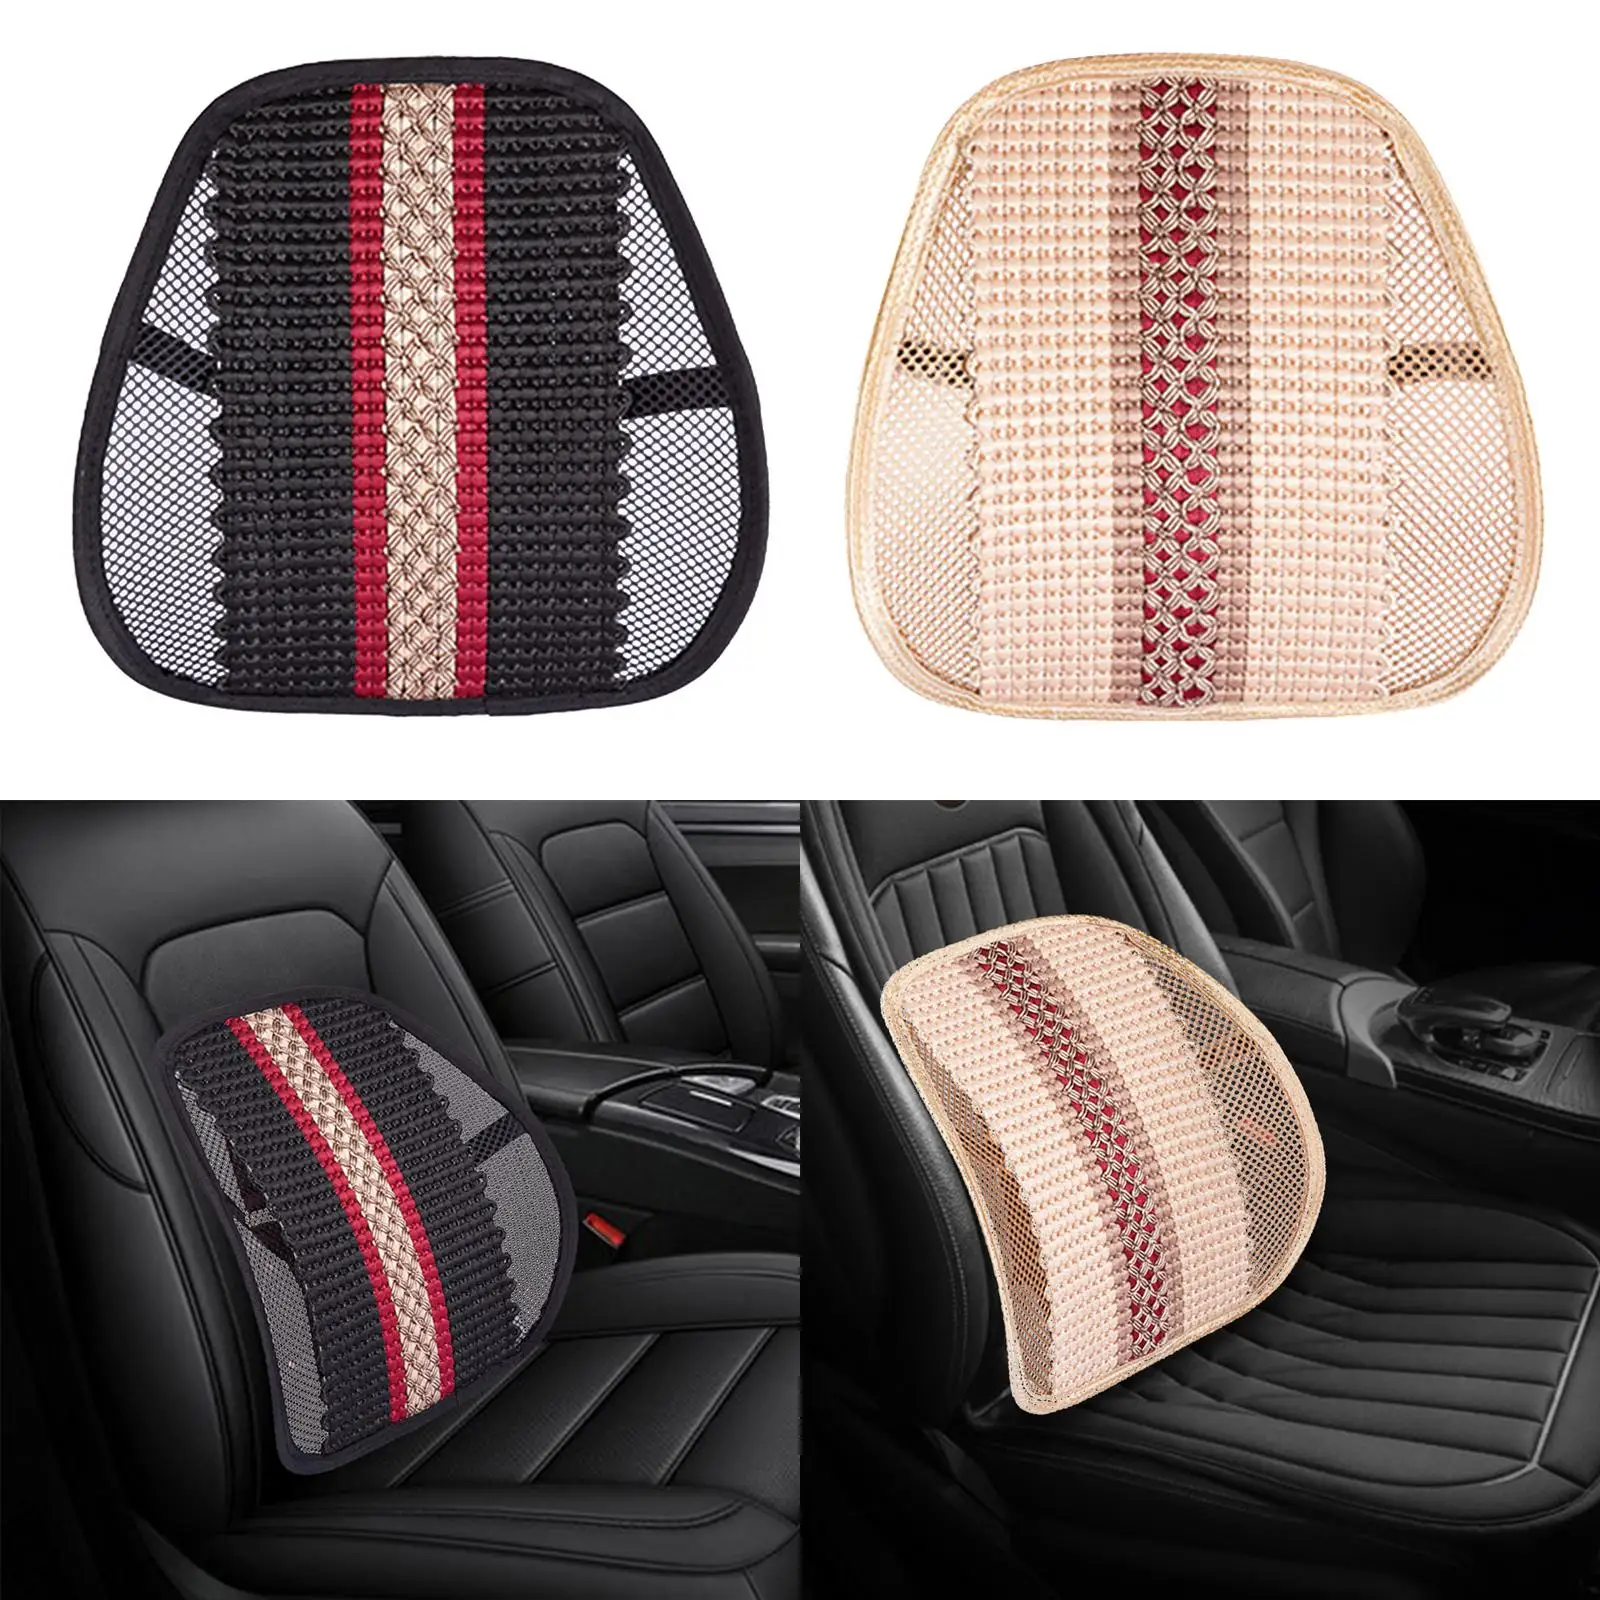 Lumbar Support Ergonomic Back Support Seat Cushion for Car Home Office Chair